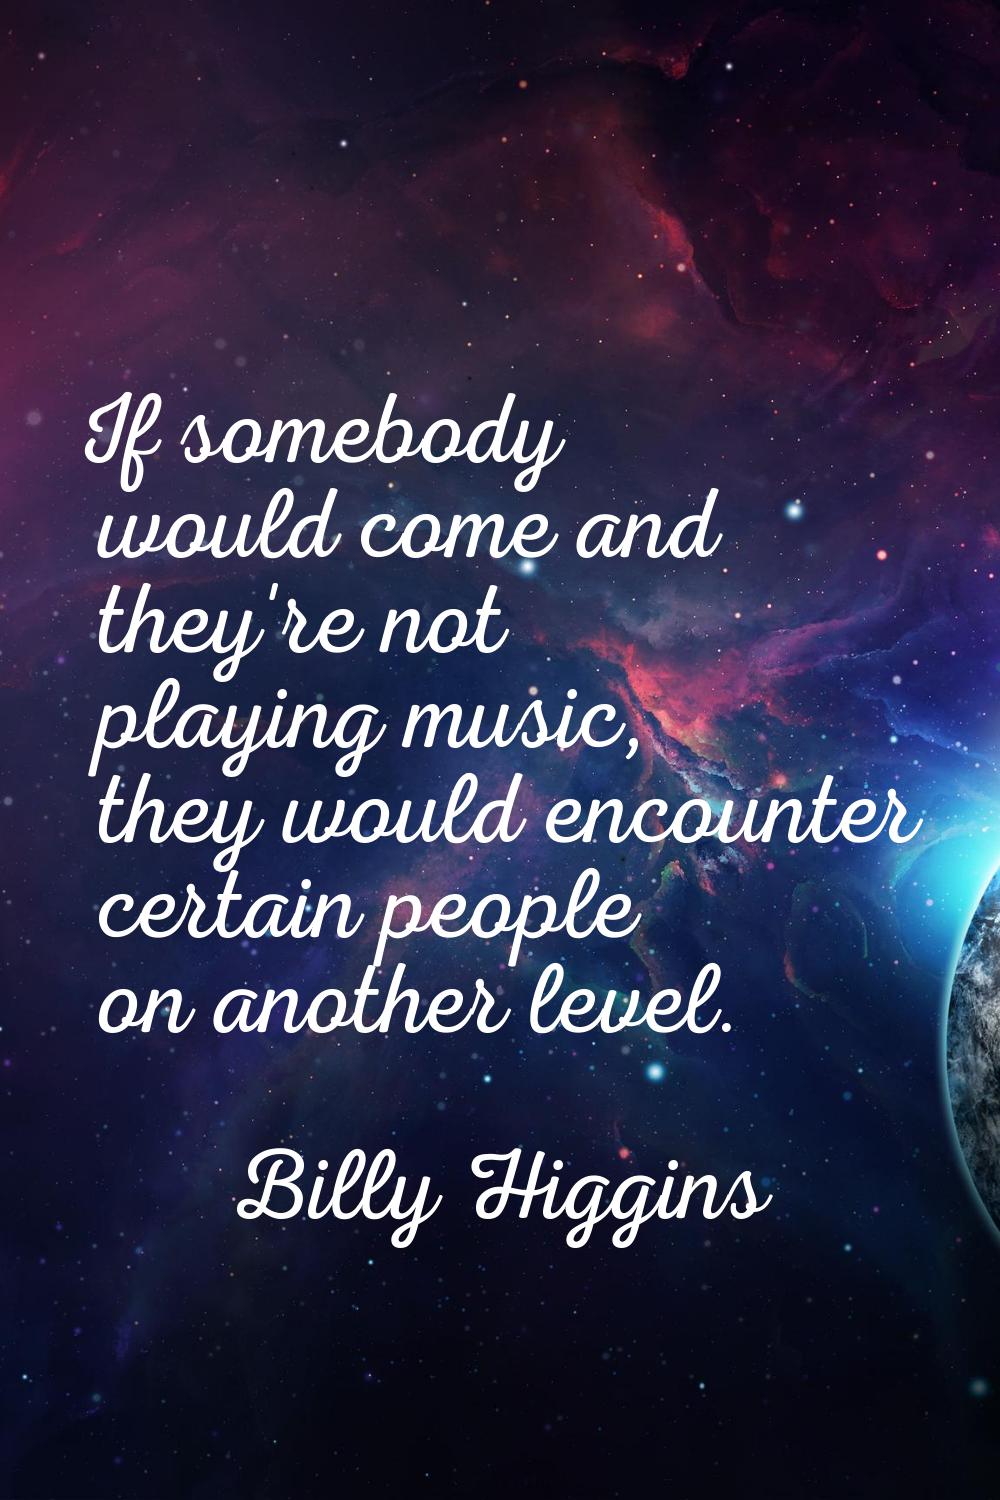 If somebody would come and they're not playing music, they would encounter certain people on anothe